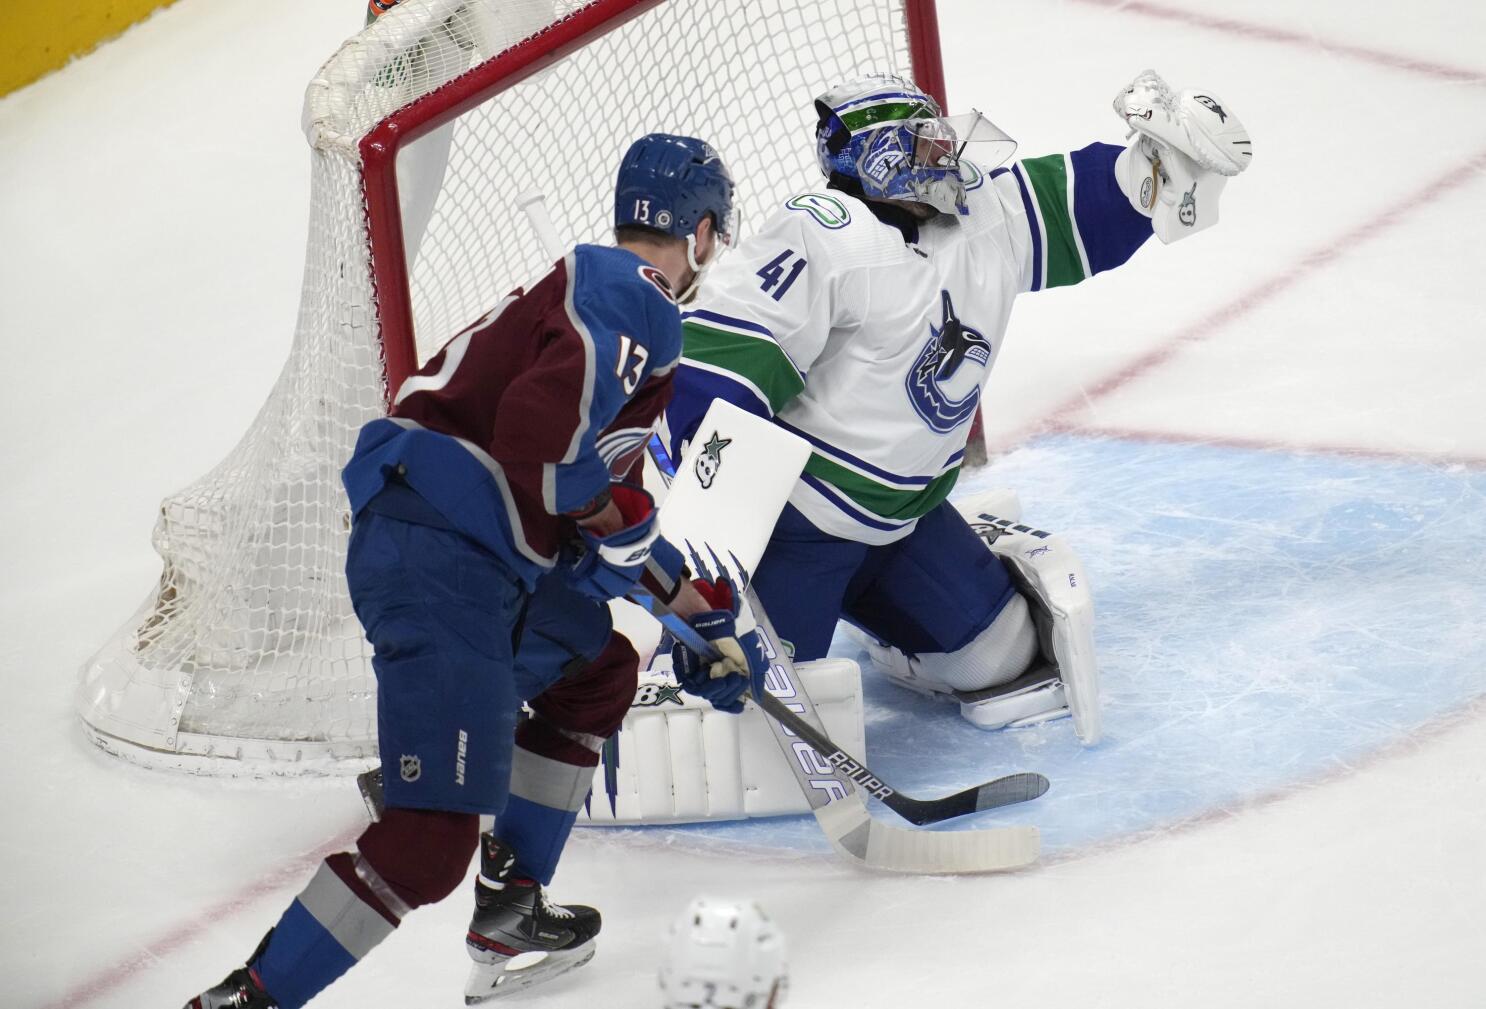 One year ago today, the Canucks brought back their Flying Skate